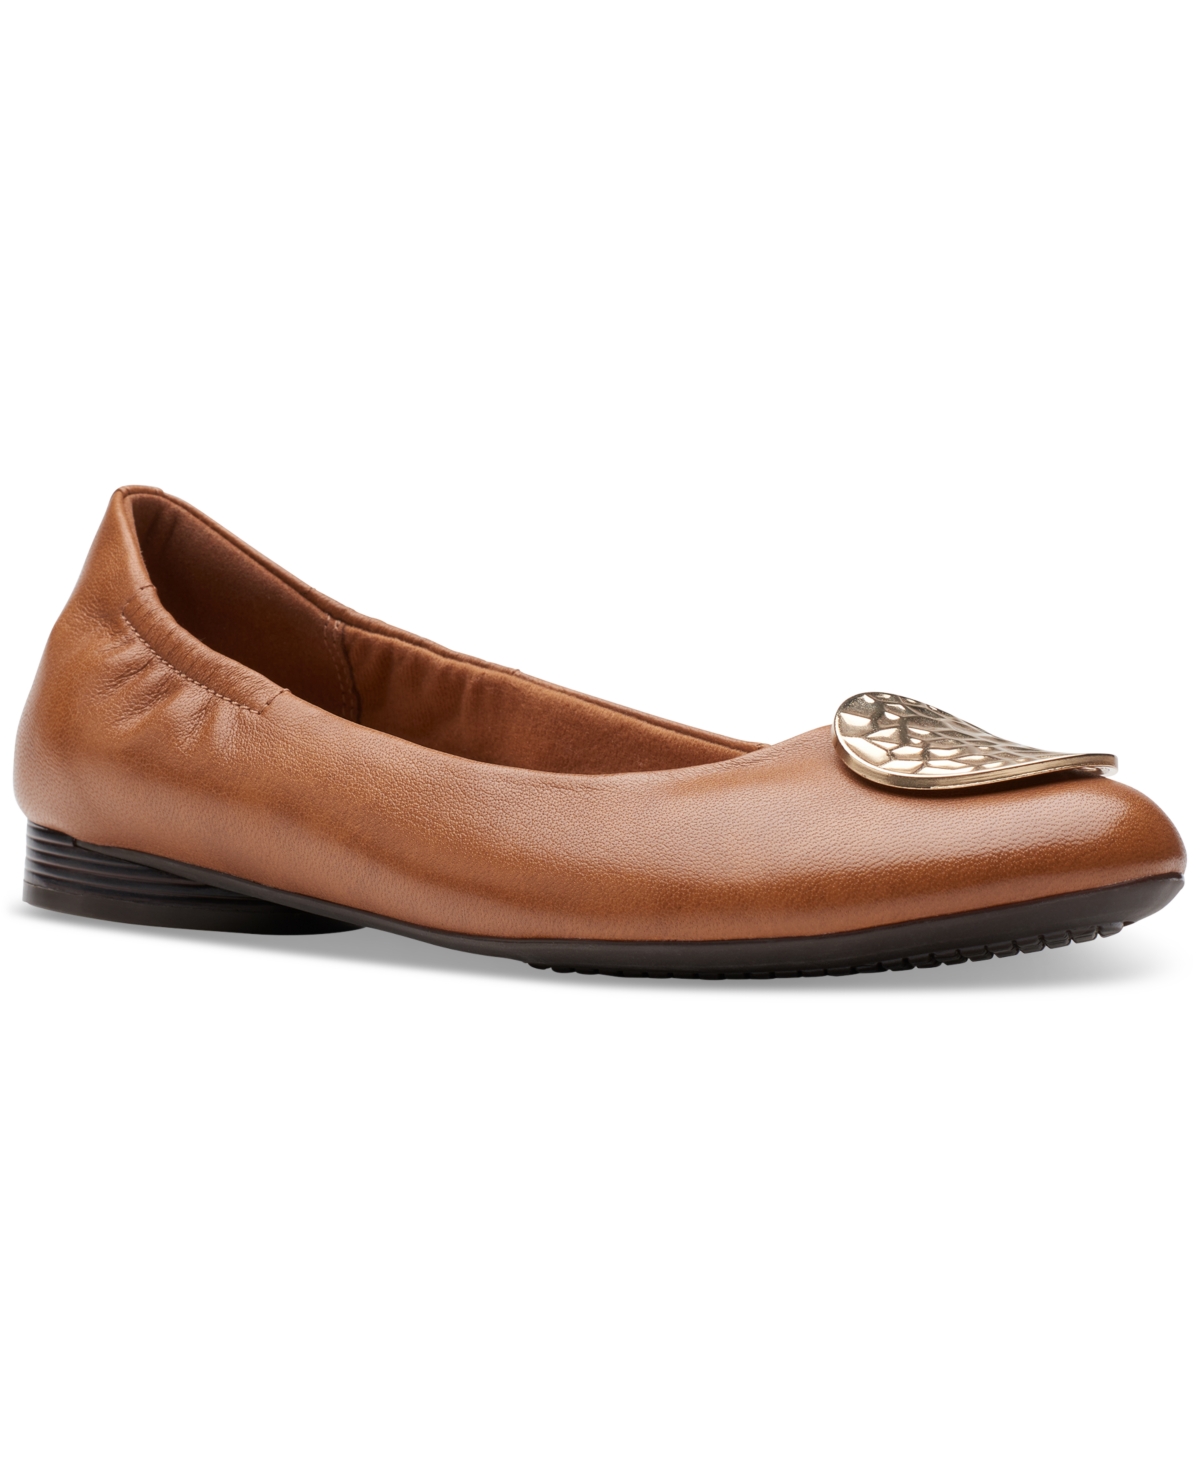 Clarks Women's Loreleigh Ave Ornament-trim Ballet Flats In Tan Leather